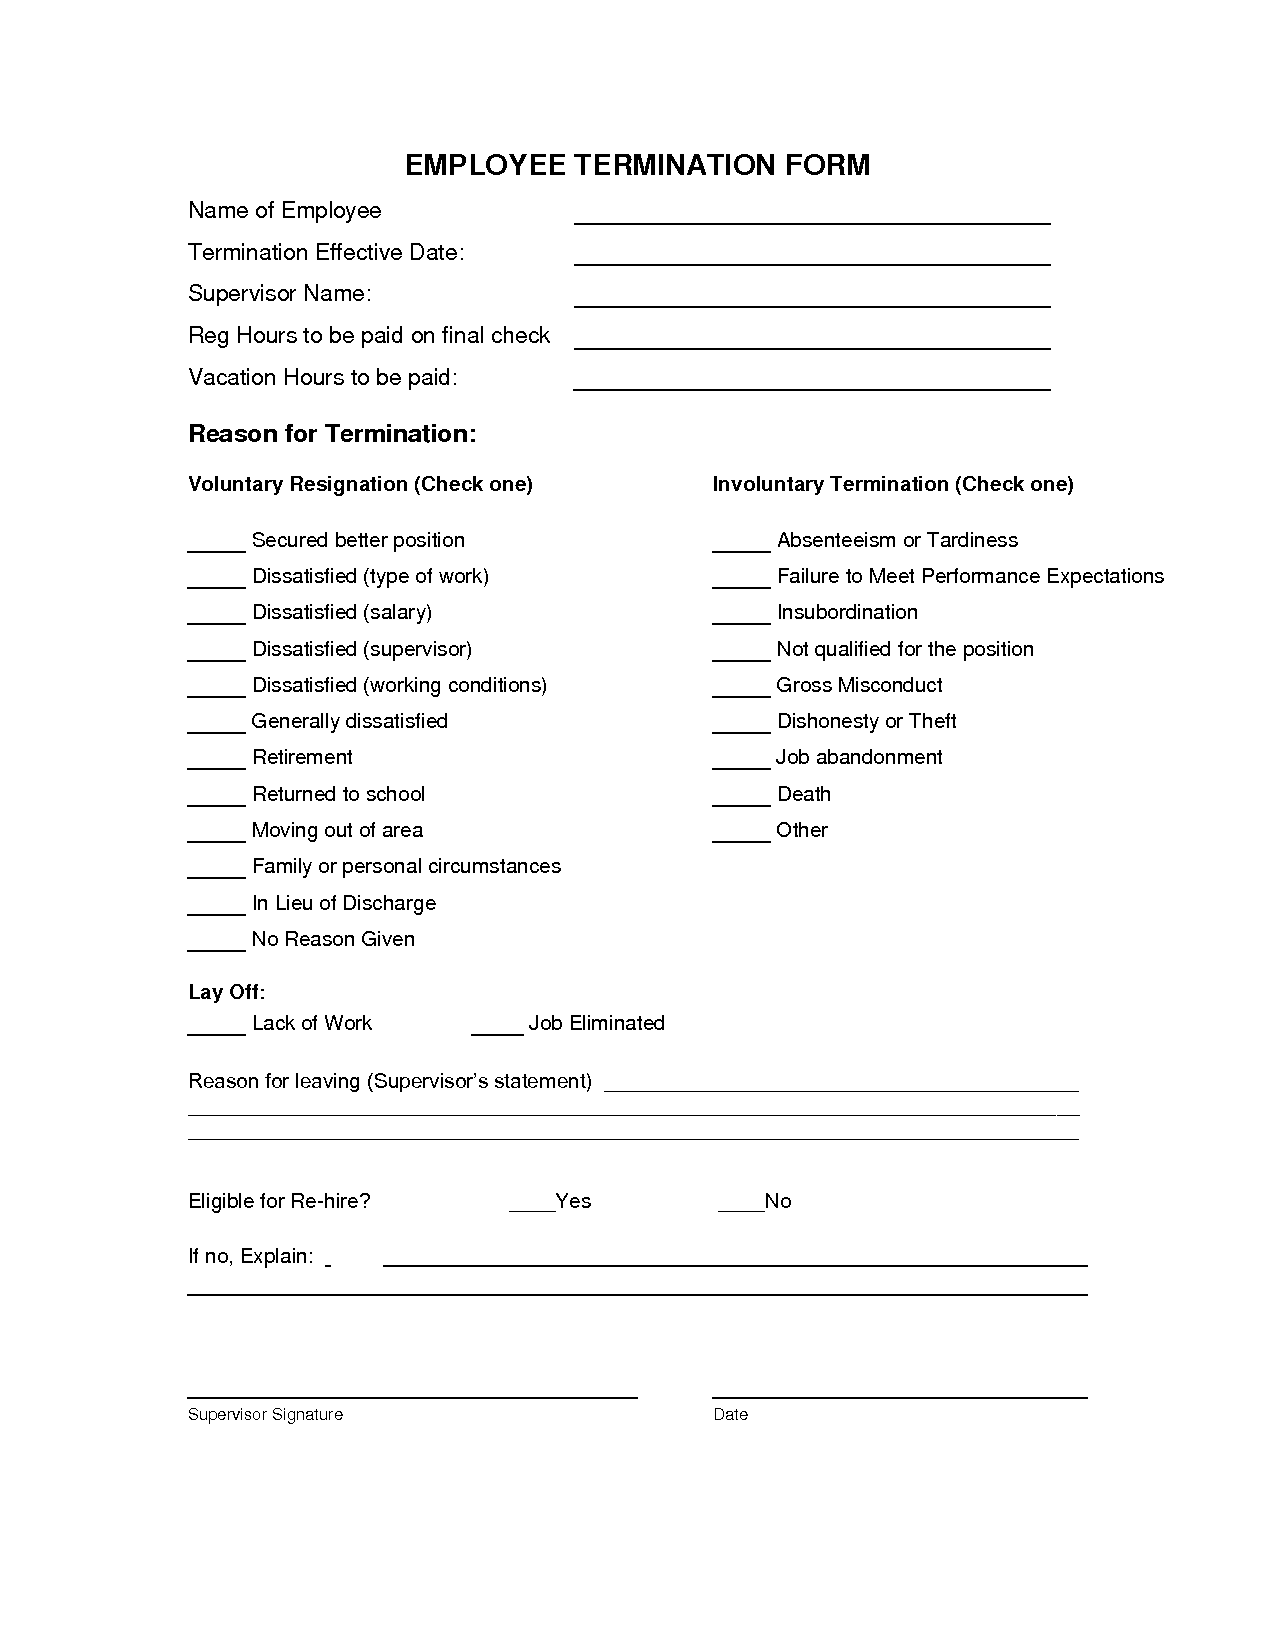 printable-termination-form-template